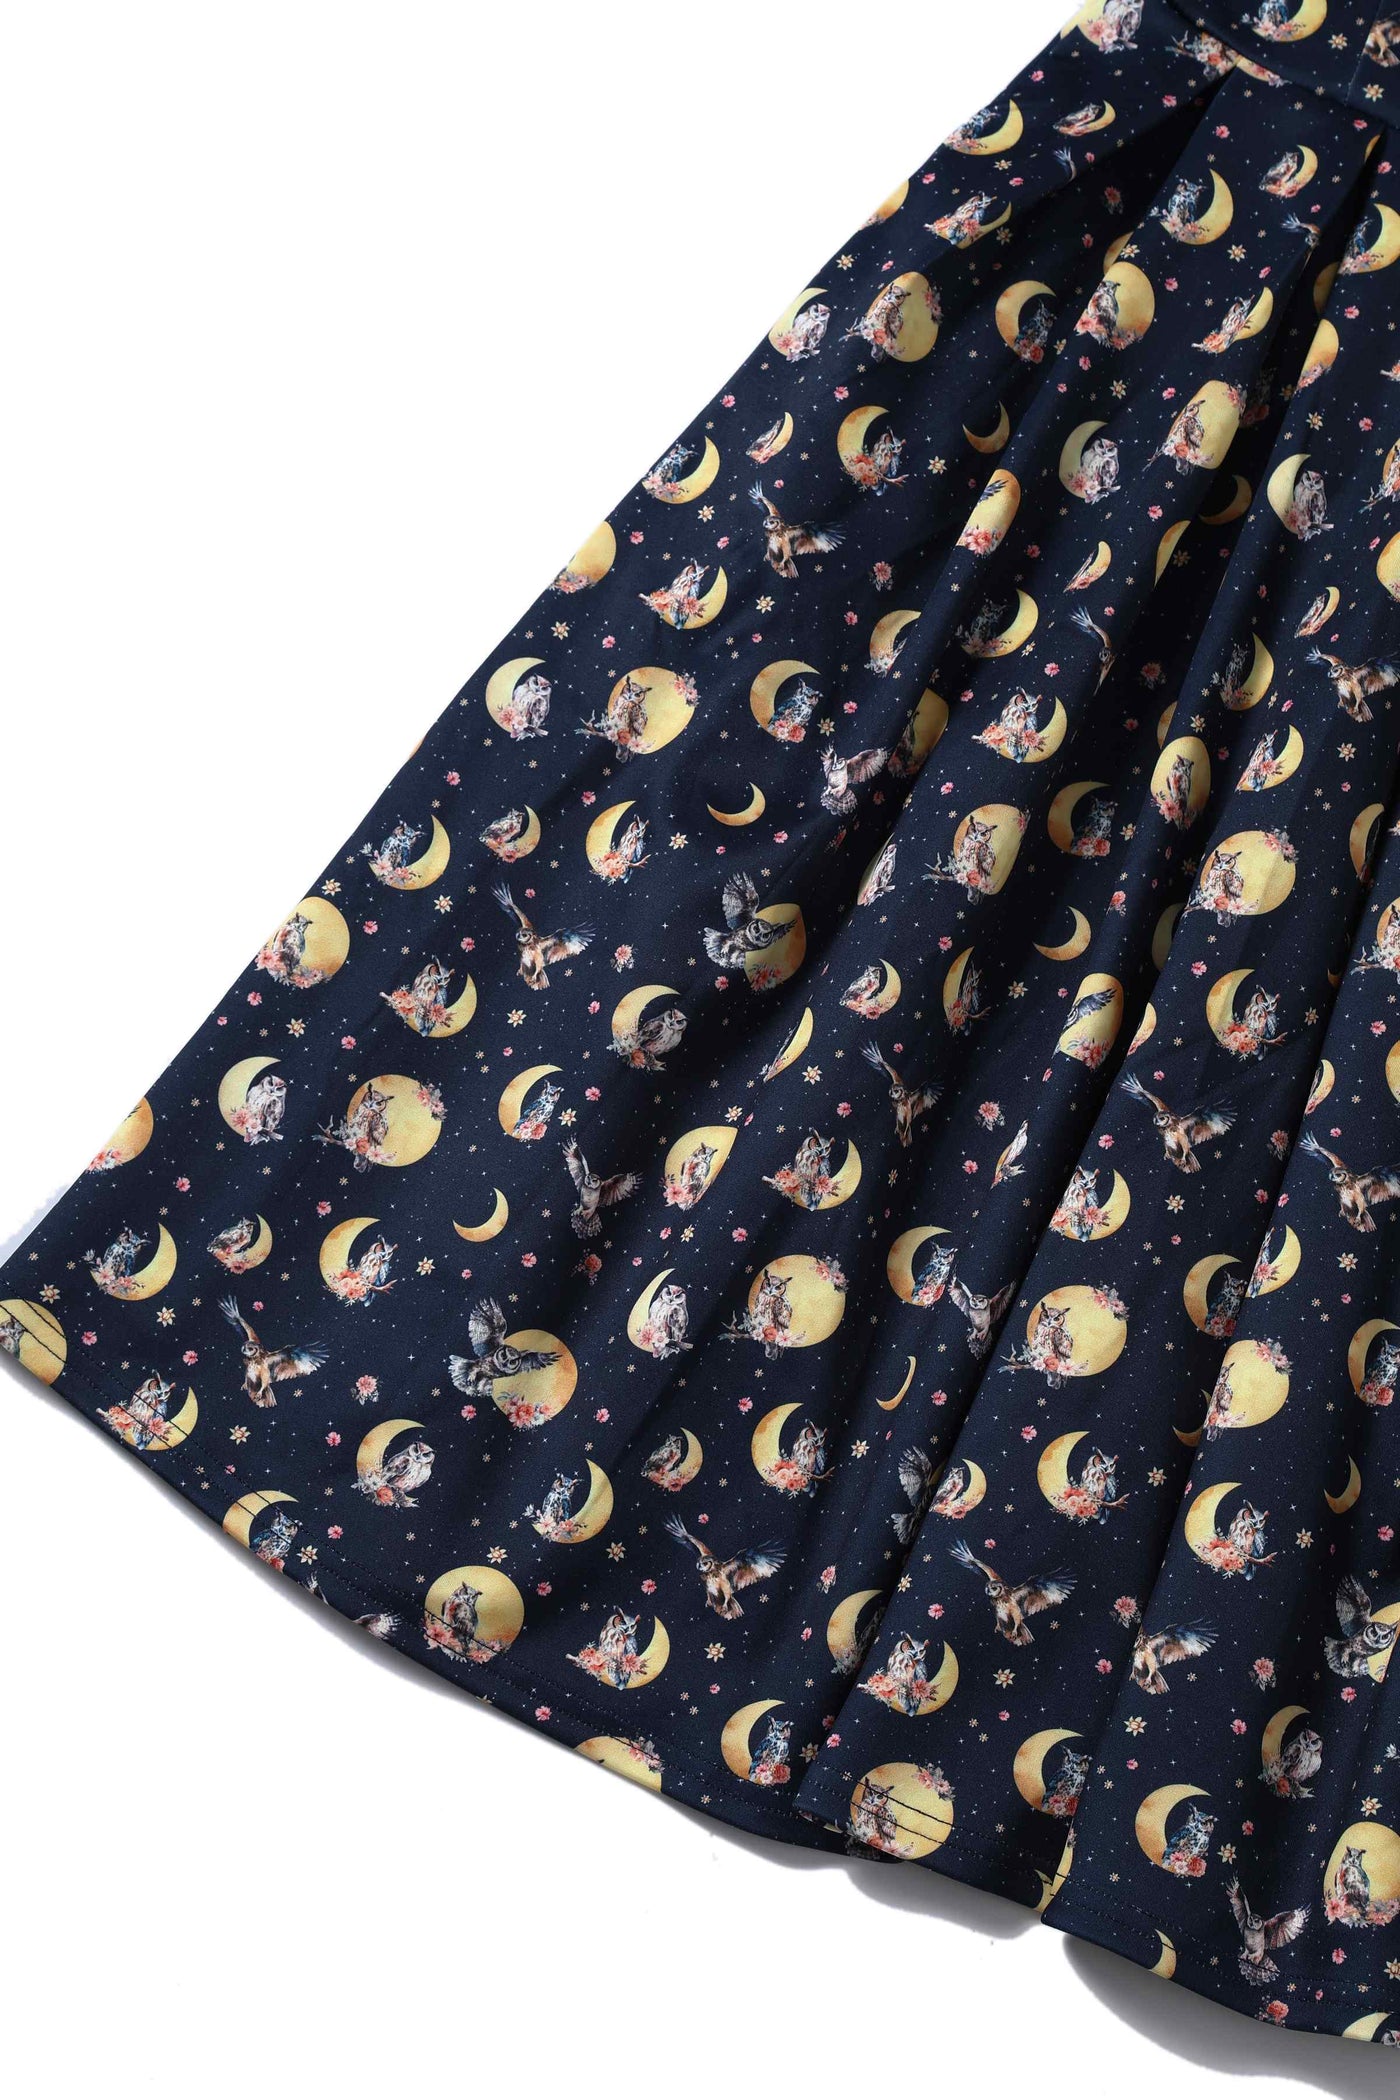 Close up View of Night Owl Print Sleeveless Swing Dress in Navy Blue